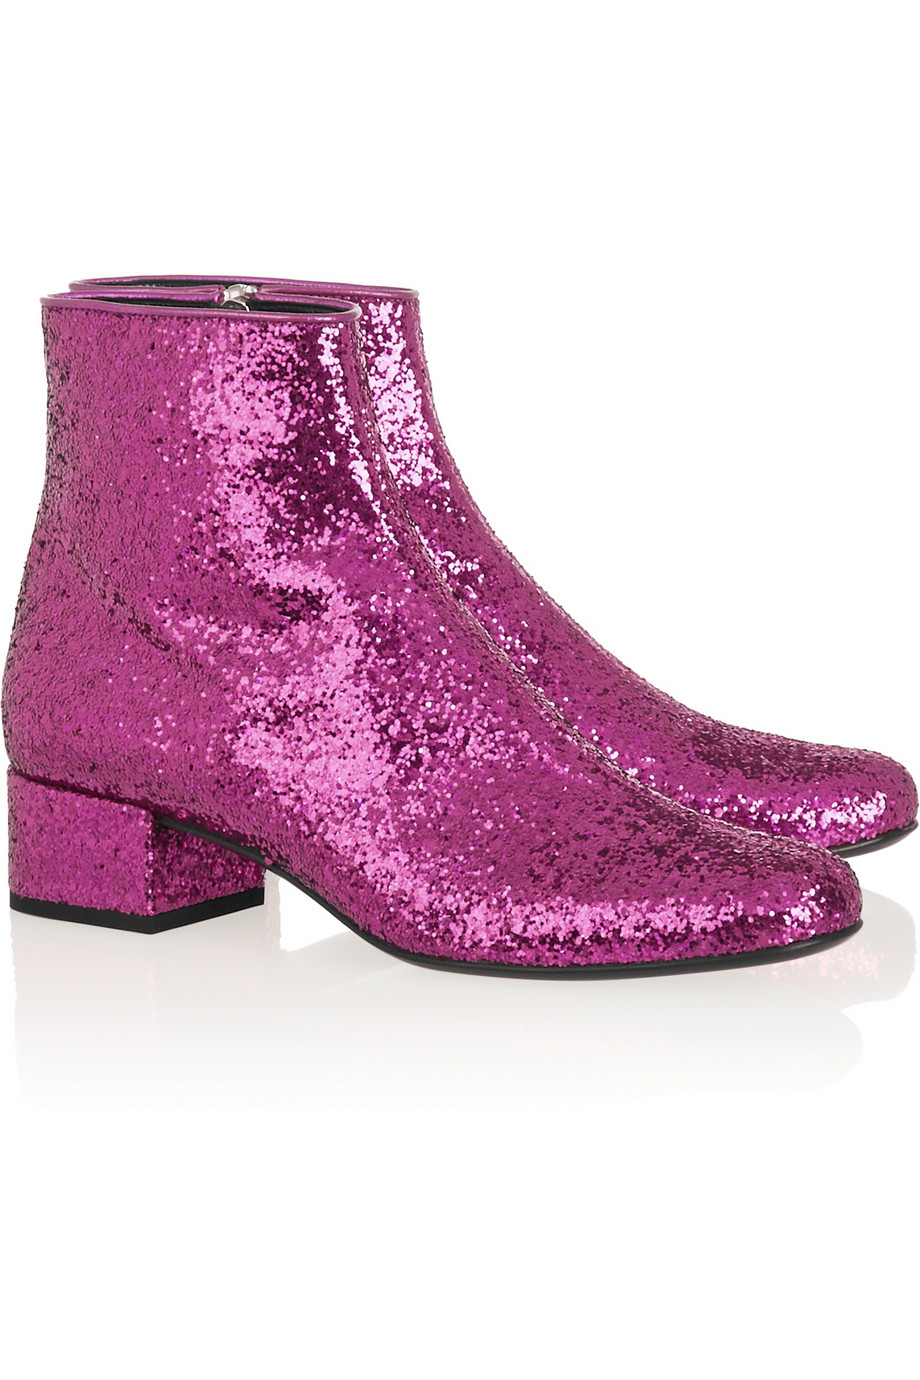 Saint Laurent Glitter-Finished Leather Ankle Boots in Pink (Purple 